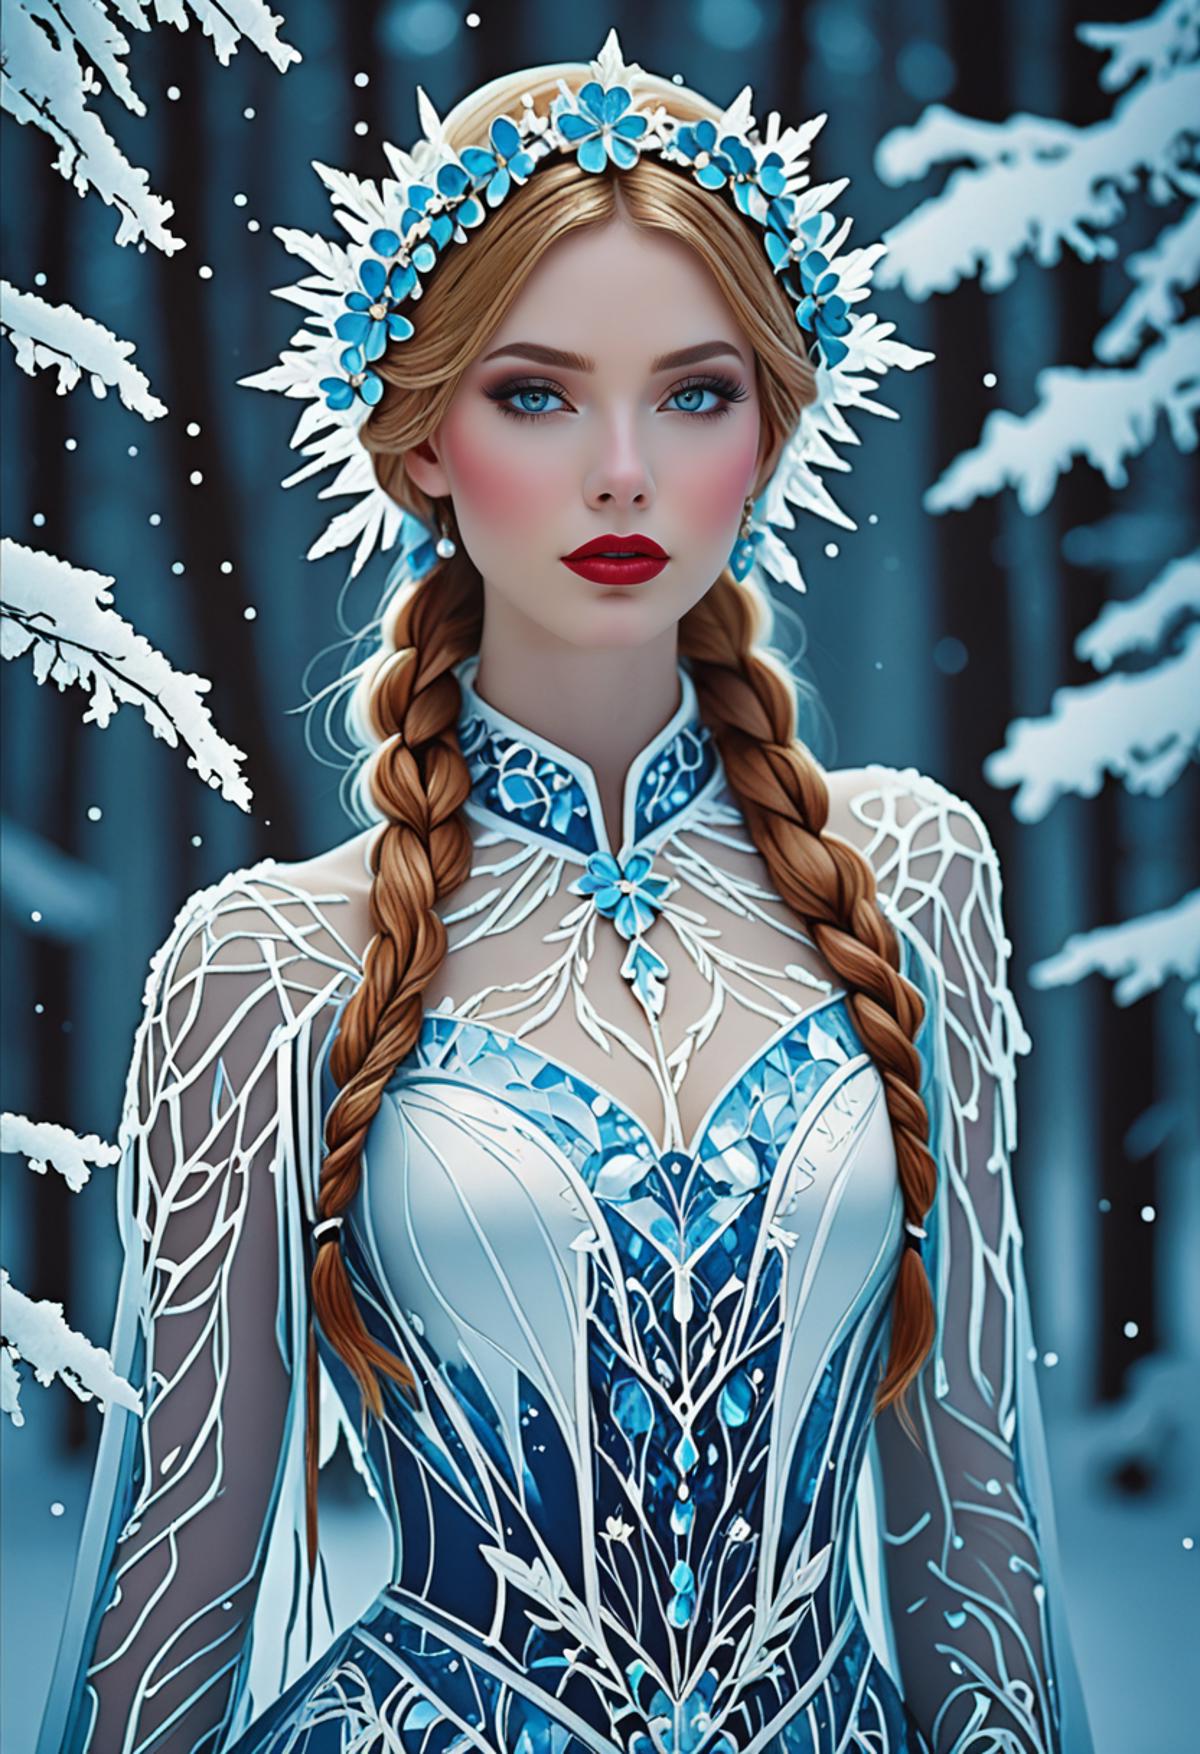 Artistic Illustration of a Frozen Beauty in a Snow-Covered Forest